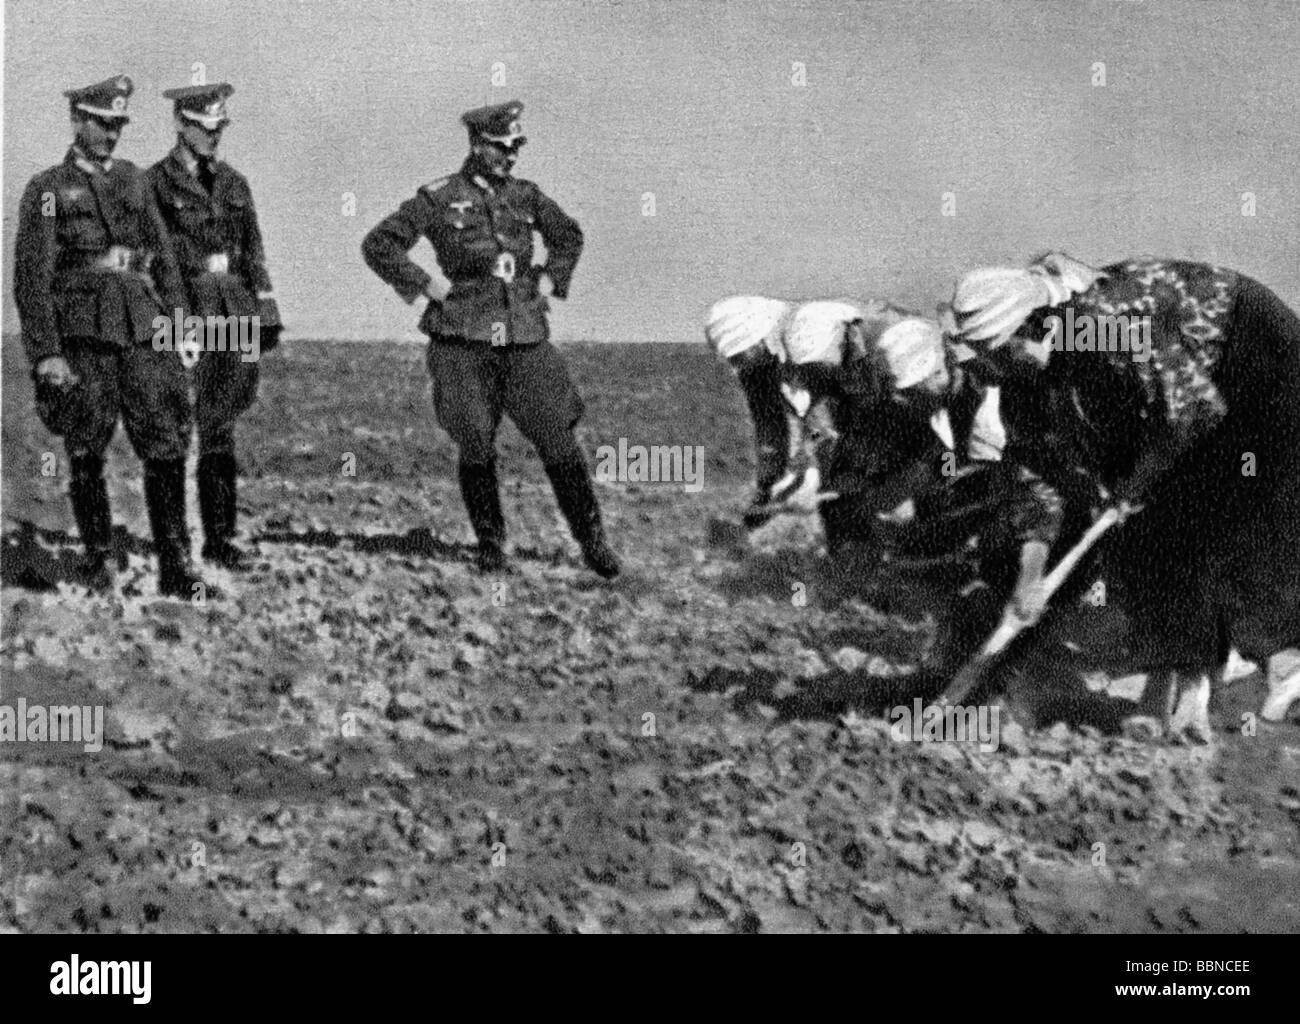 events, Second World War / WWII, Russia, behind the front, Russian countrywomen during field work for the German Wehrmacht, circa 1942, Stock Photo